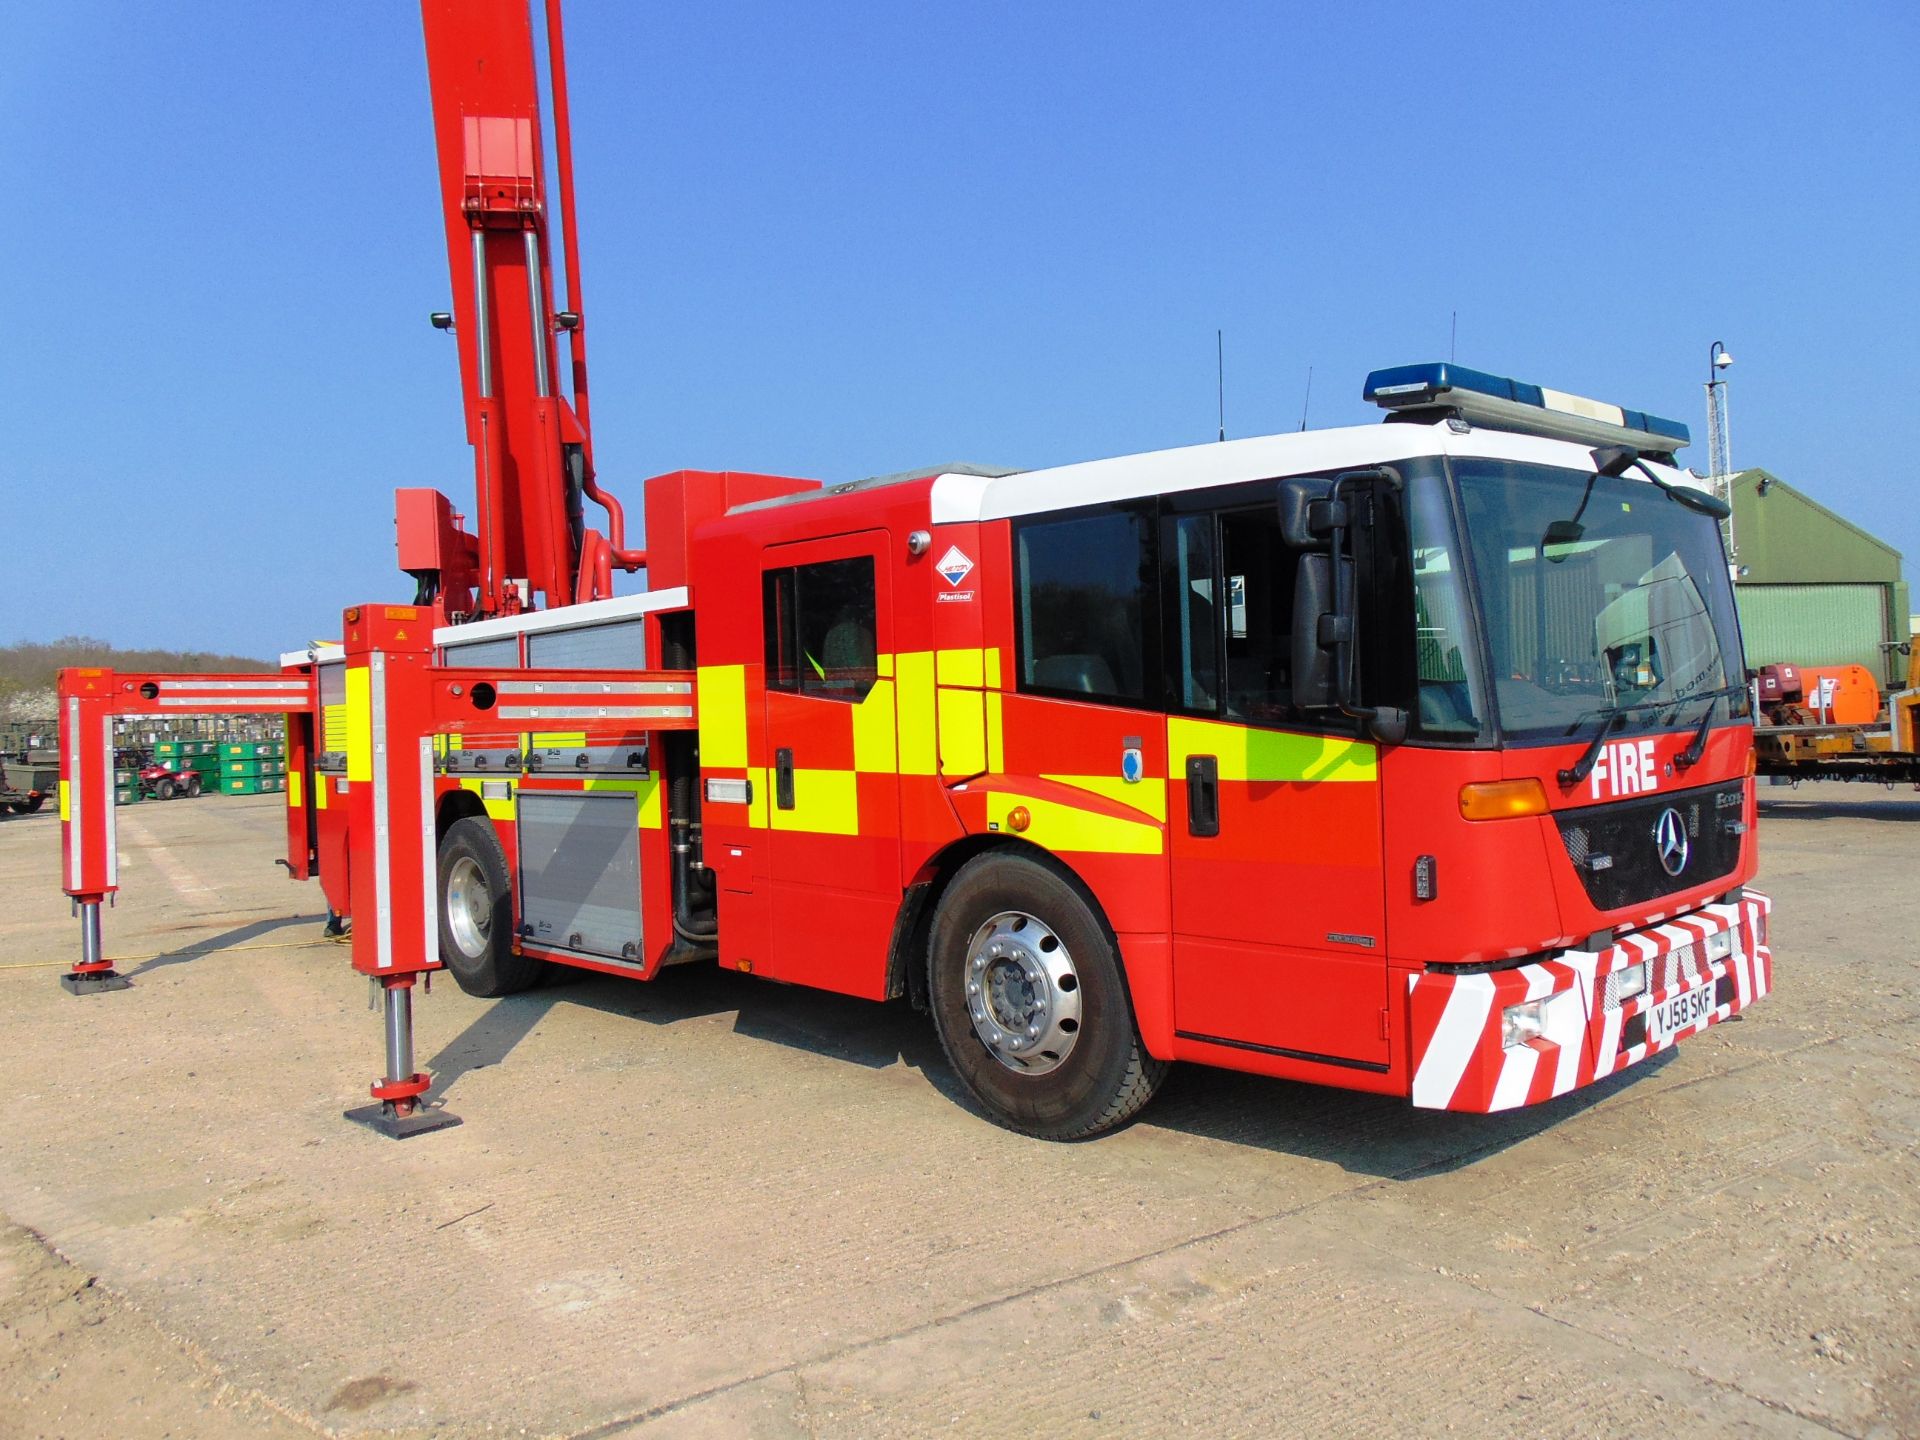 2008 Mercedes Econic CARP (Combined Aerial Rescue Pump) 6x2 Aerial Work Platform / Fire Appliance - Image 17 of 49